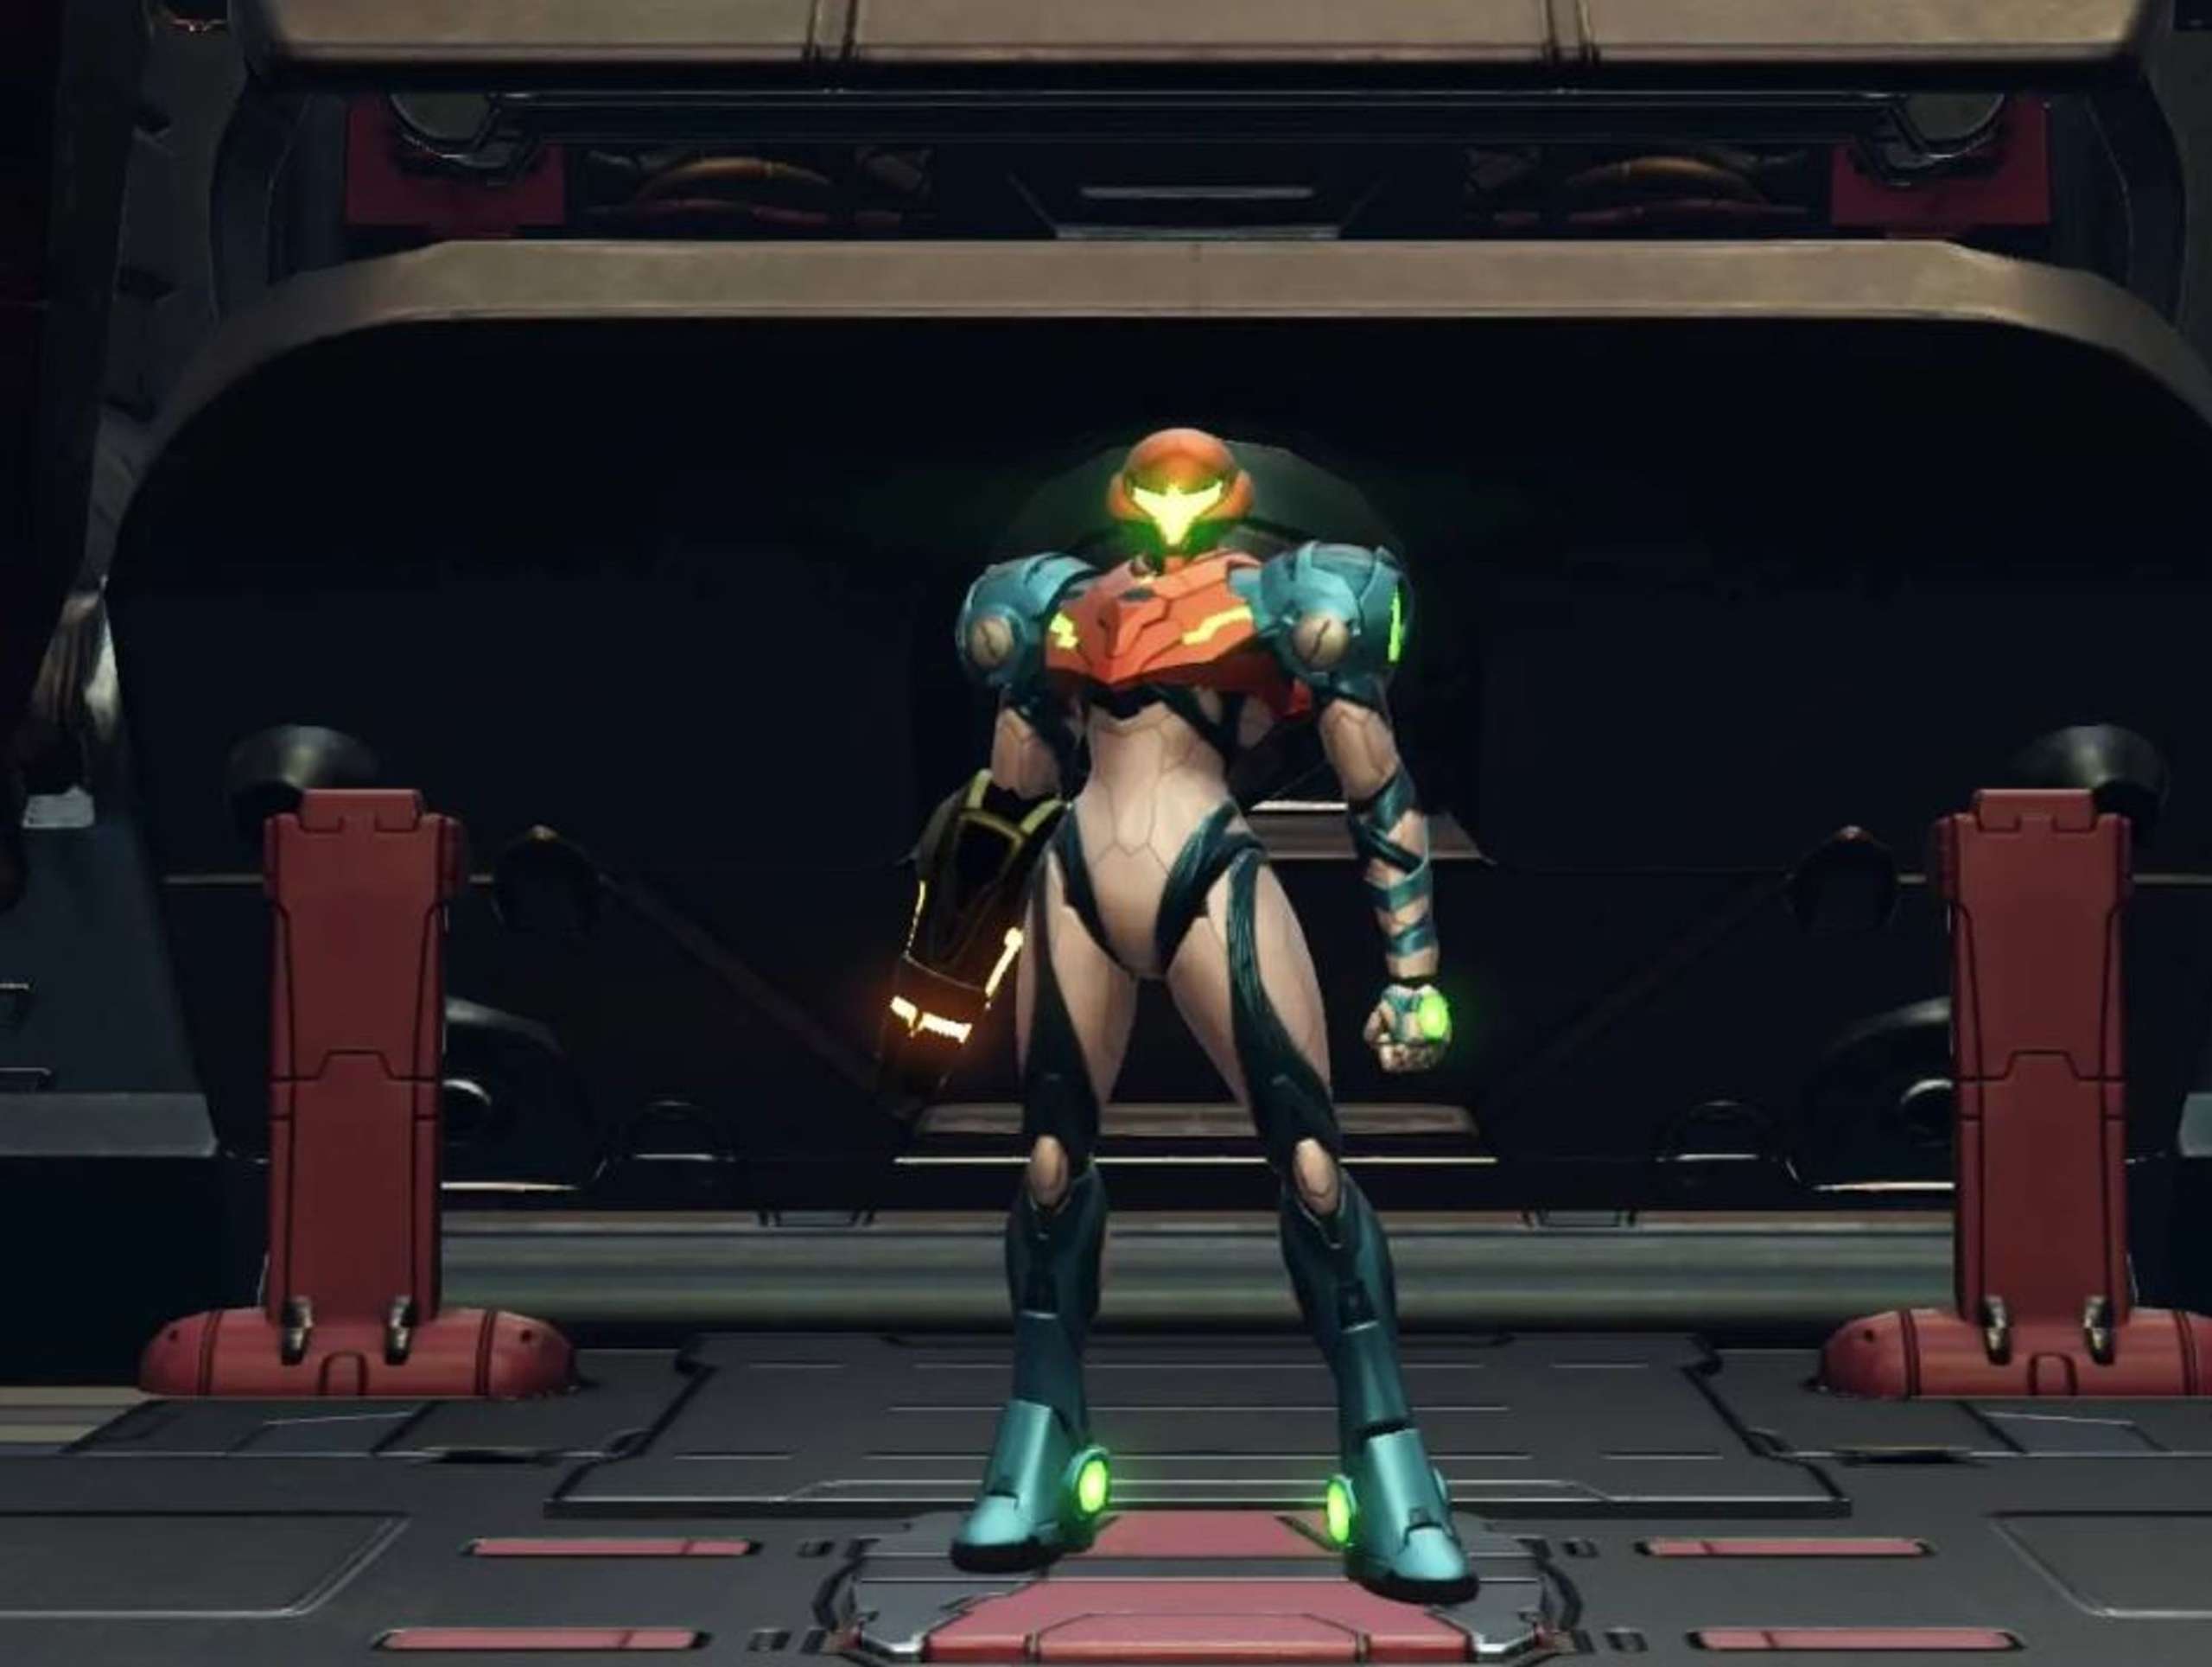 Metroid Dread A Survival Rush mode has also been added, although it differs from the Boss Rush mode in that you will have limited time to take out as many enemies as possible